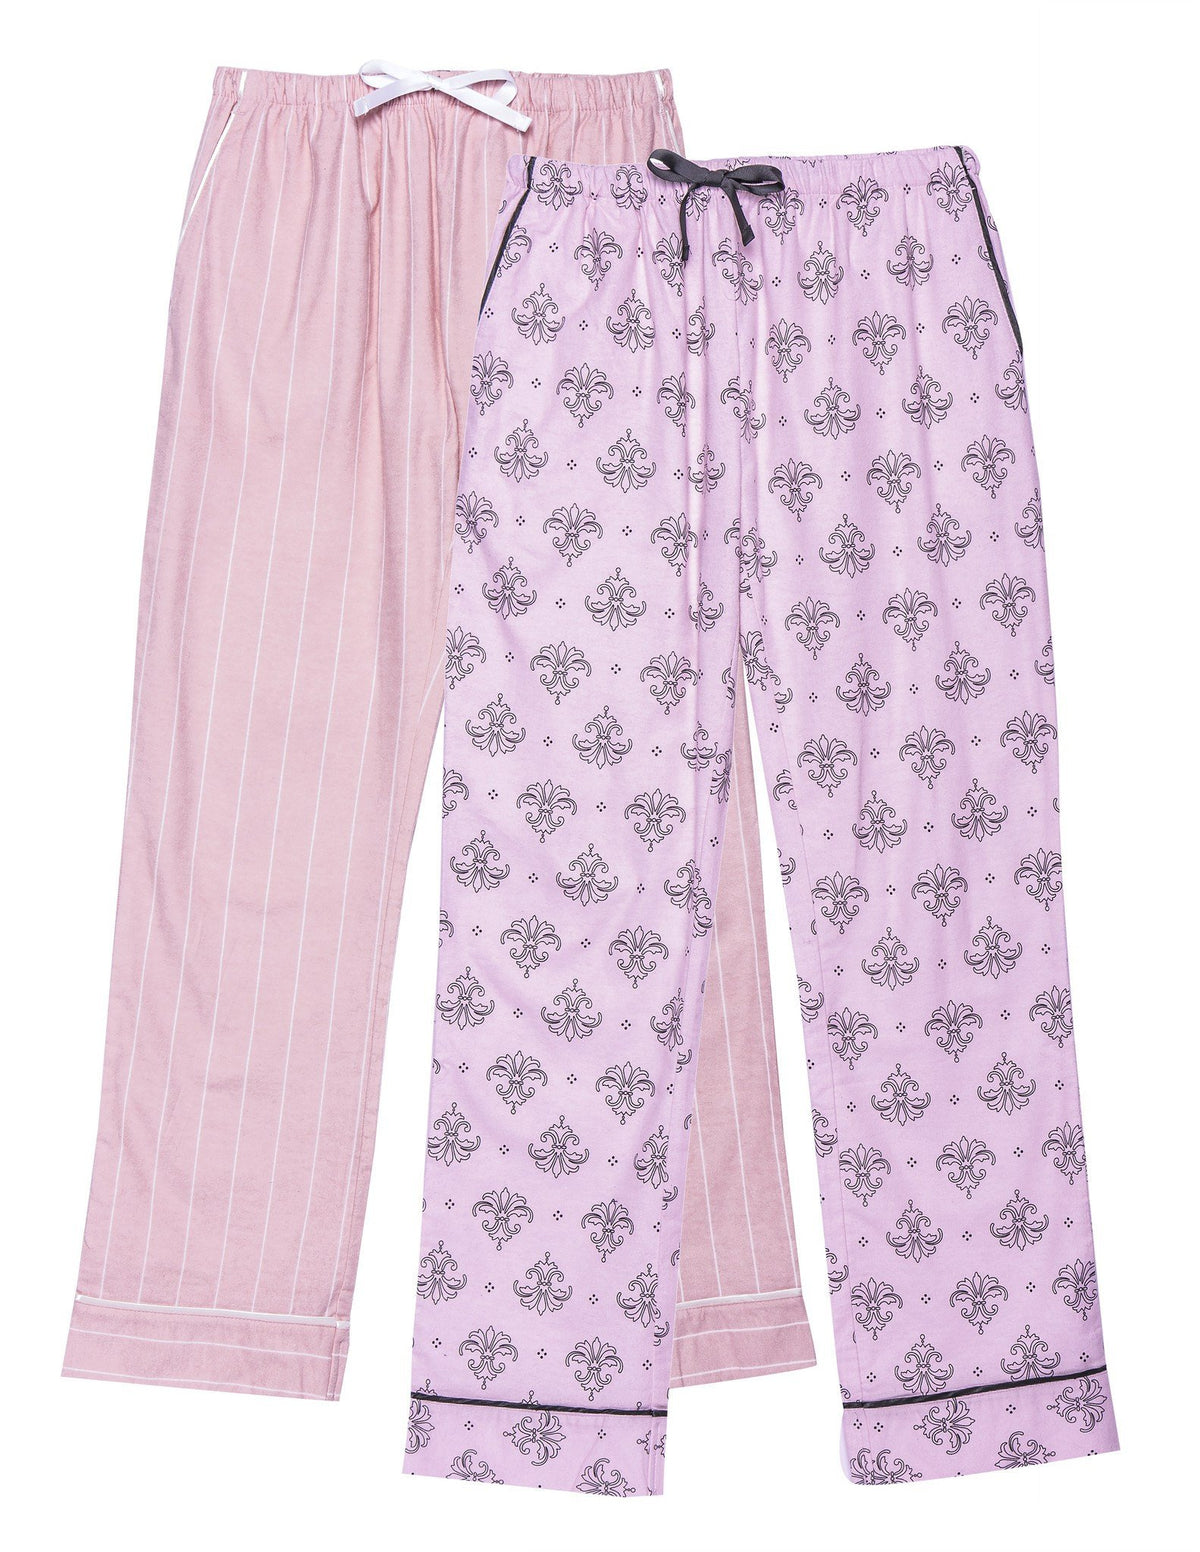 Women's 2 Pack Cotton Flannel Lounge Pants with Free Socks - 2-Pack with FREE Sock [Stripe/Fleur Pink]